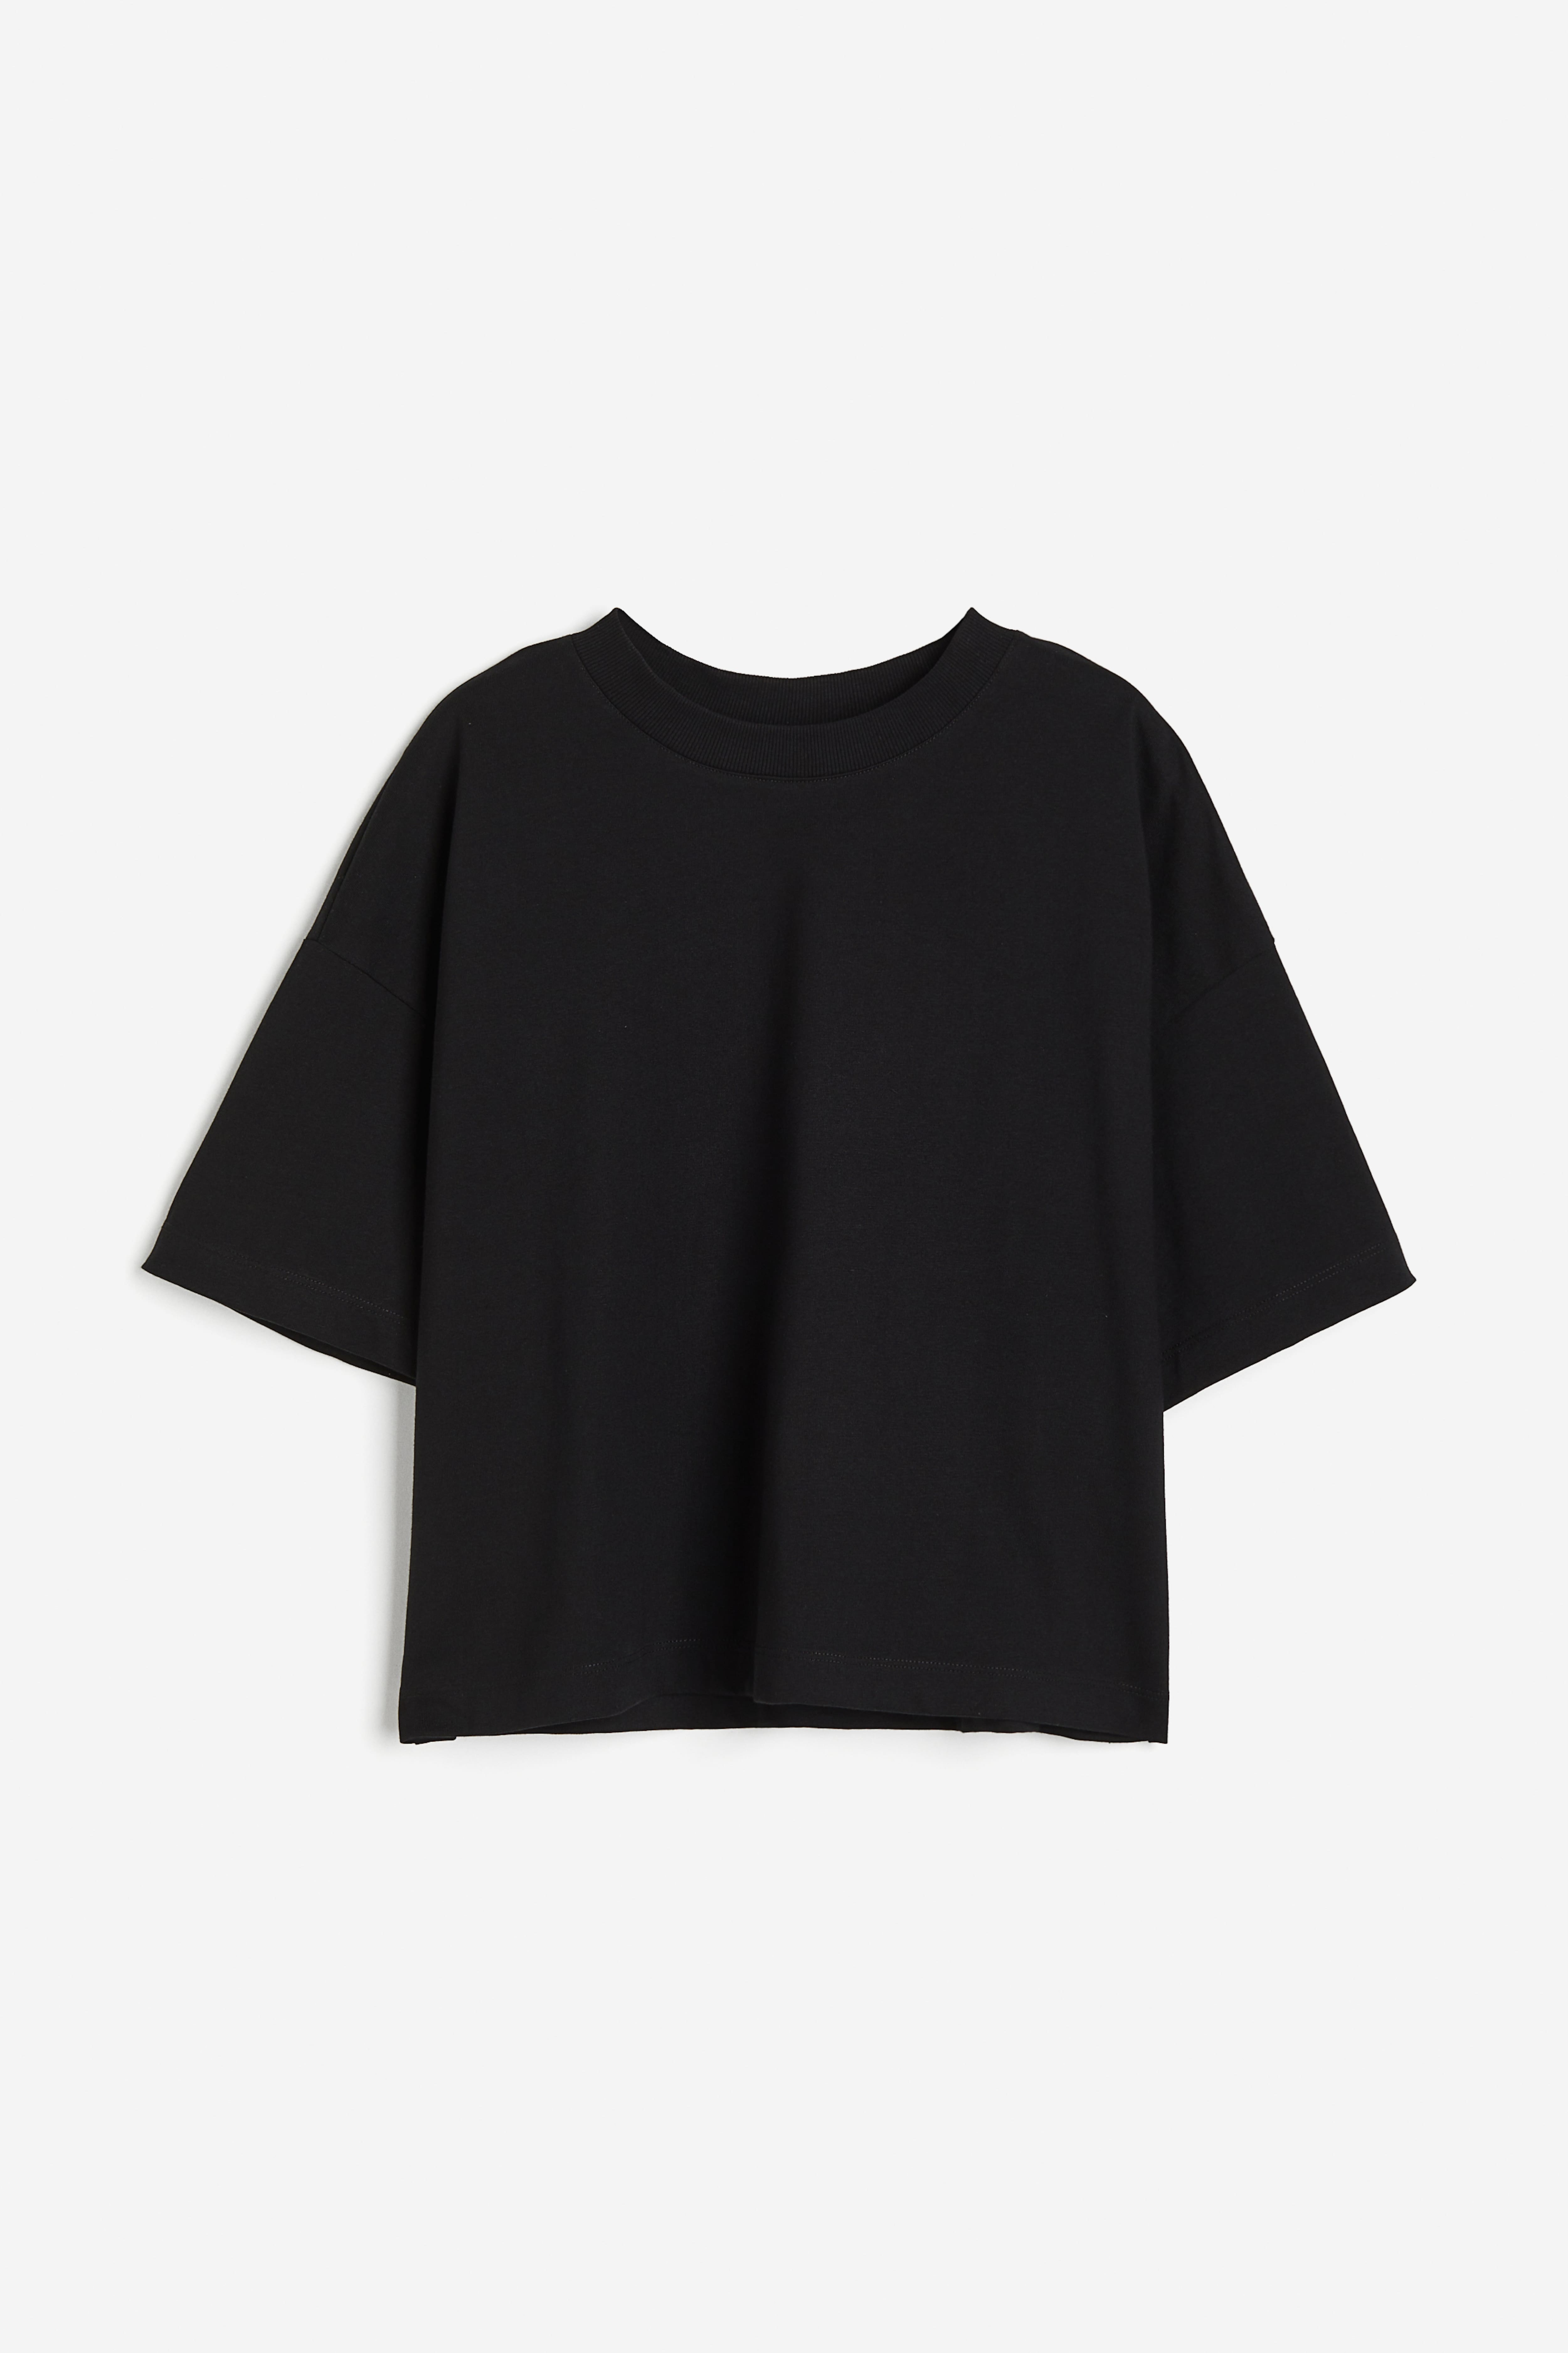 T-shirts for Women | Oversized, Printed & Crop T-shirts | H&M GB